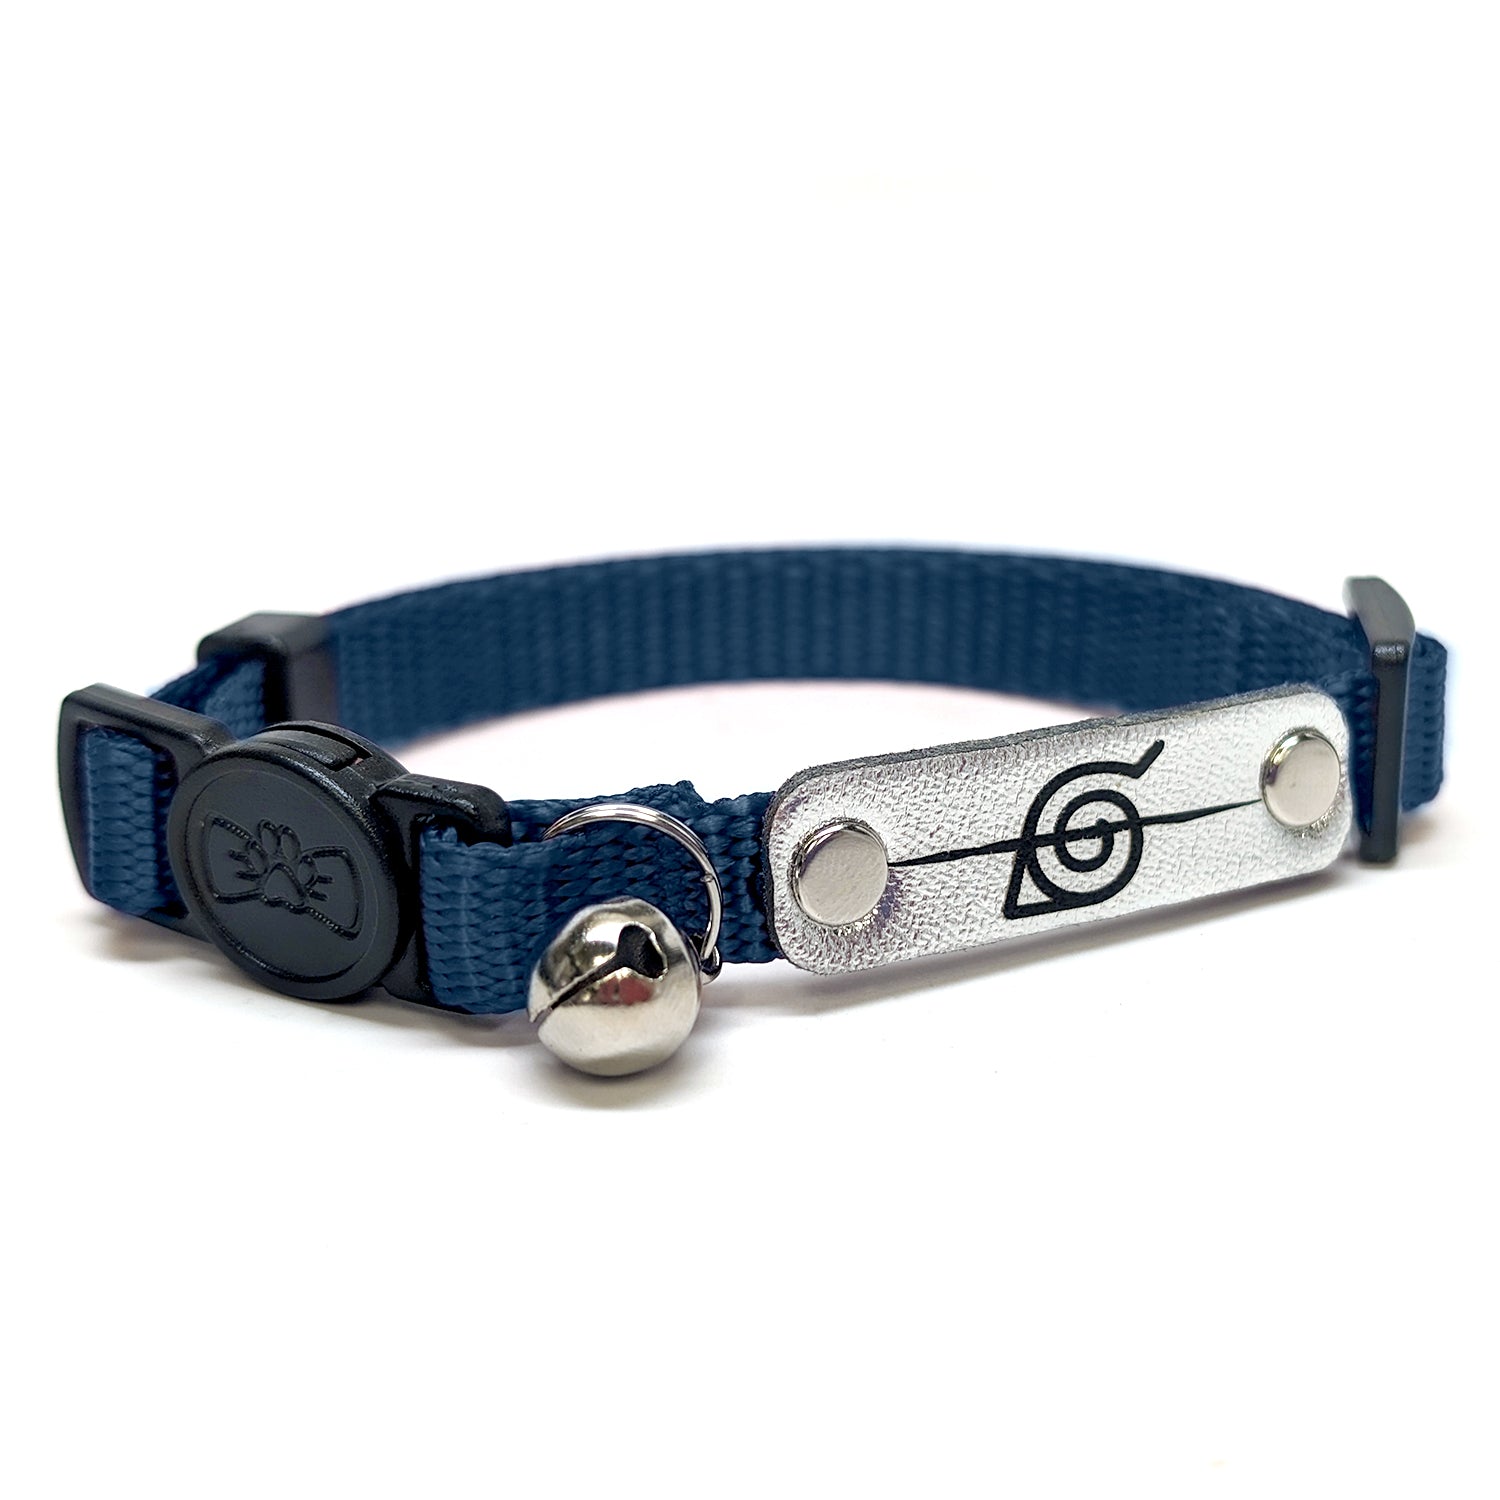 Naruto Shippuden x Pawsonify - Officially Licensed Rogue Ninja Collar (Navy) for Cats #size_Cat: 8.5-12